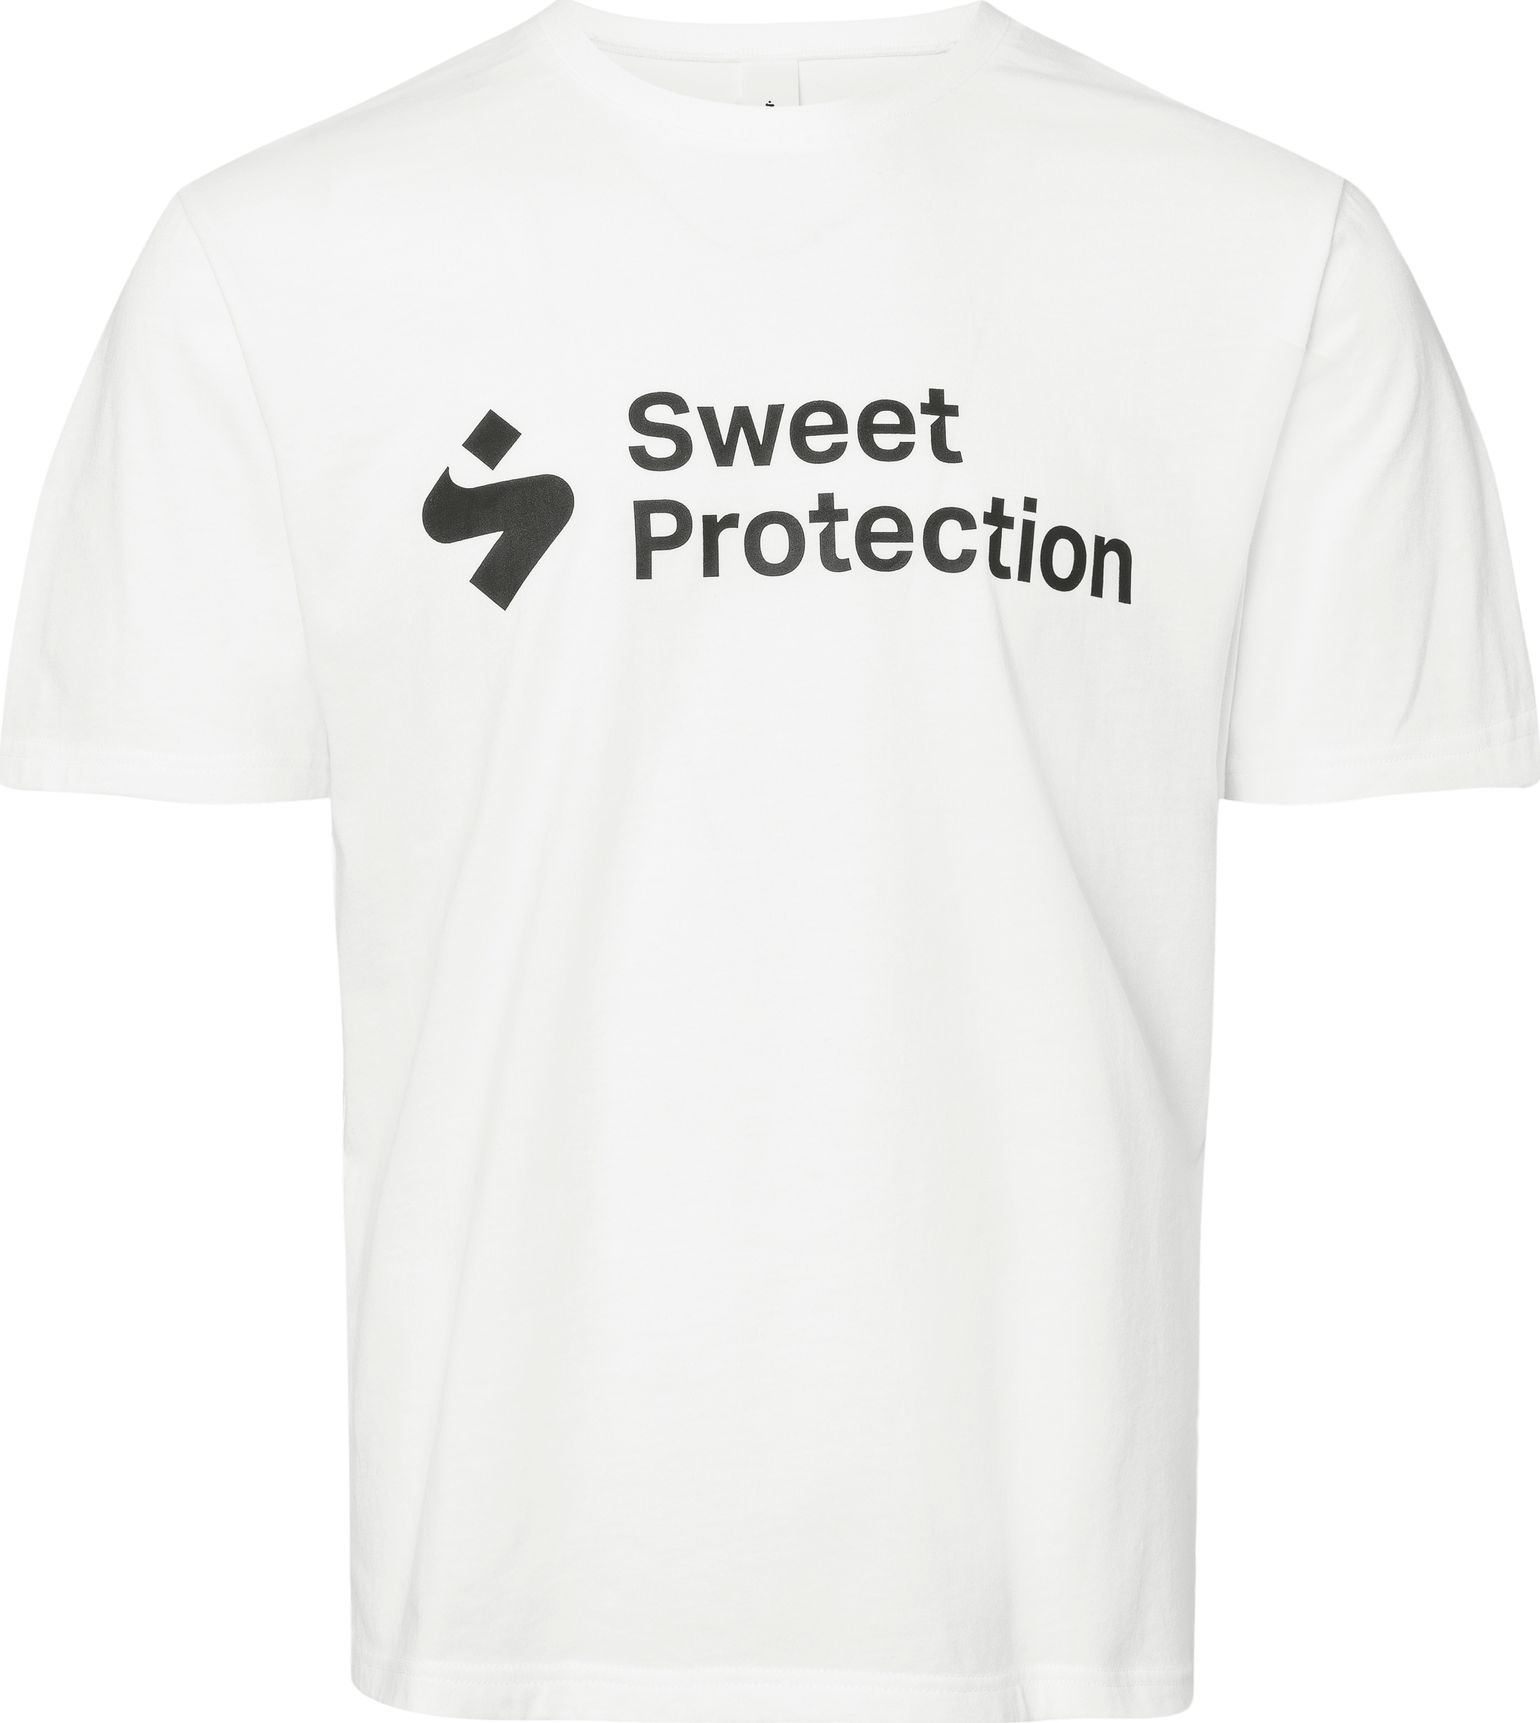 Sweet Protection Men's Sweet Tee Bright White